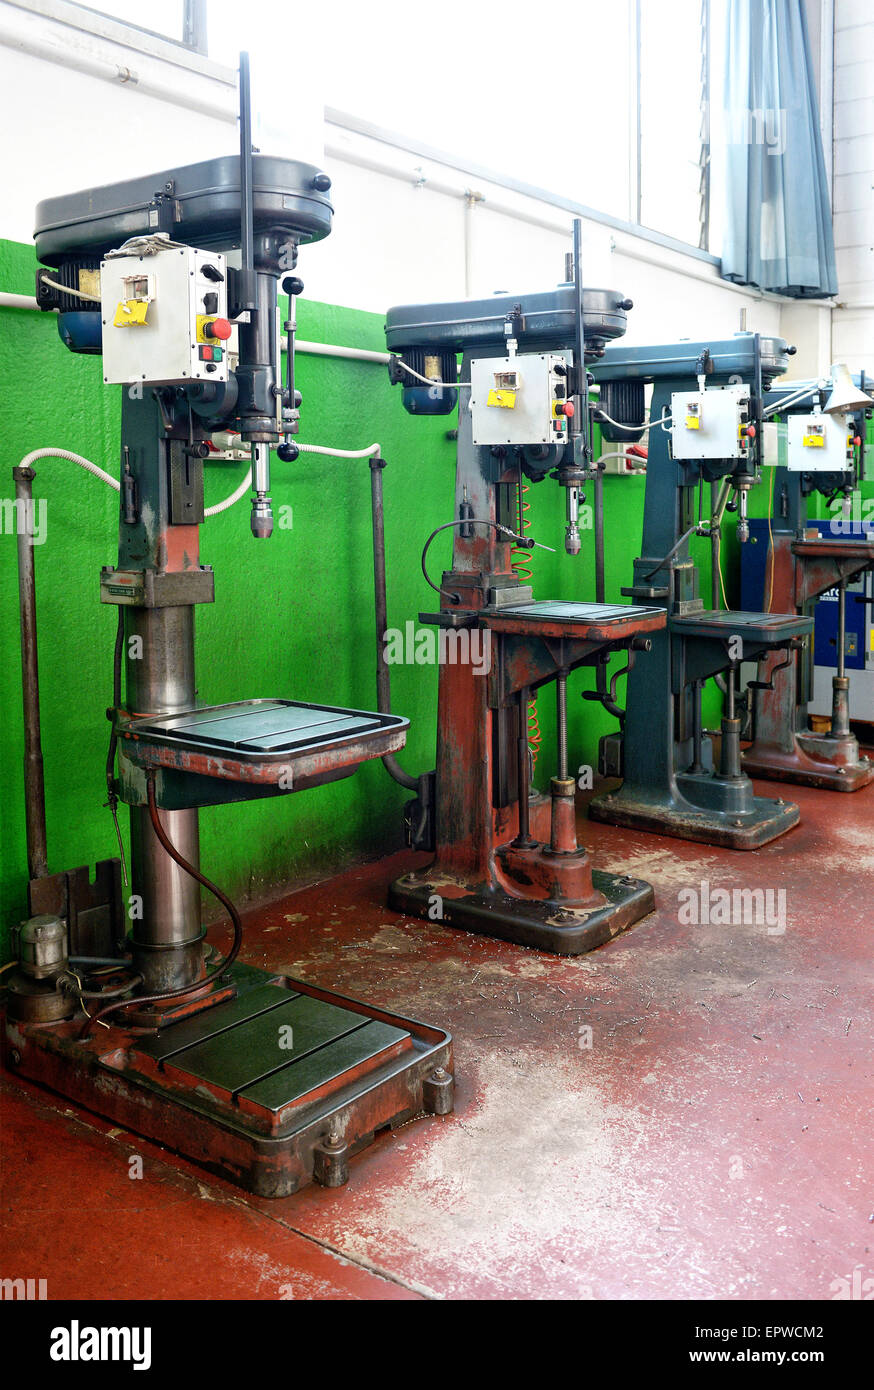 Row of freestanding bench drills in a factory or engineering workshop for industrial manufacturing and production Stock Photo